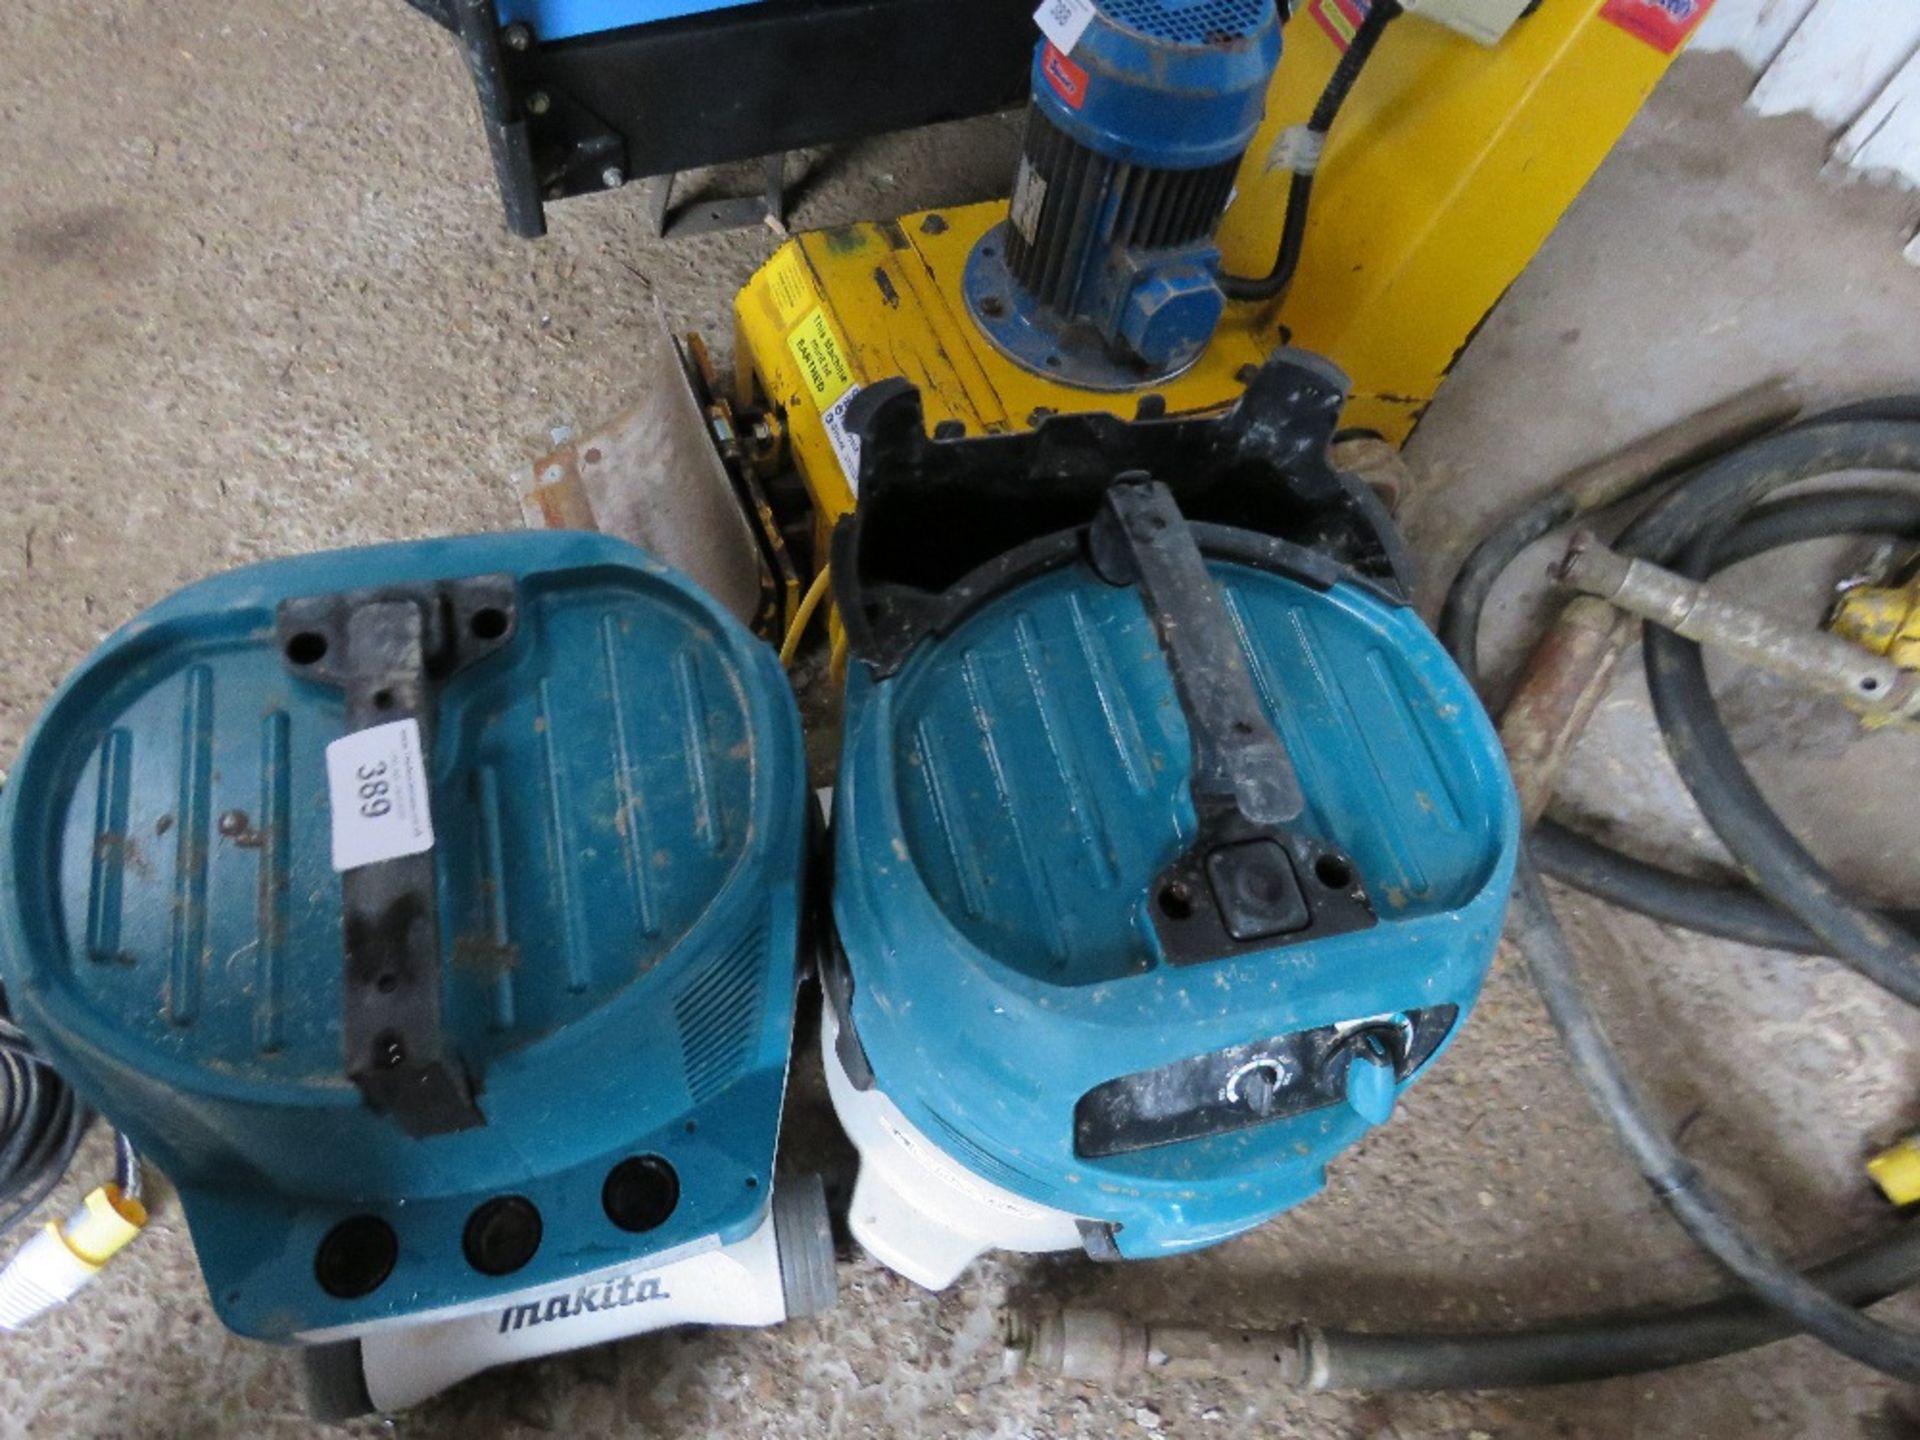 2 X MAKITA 110 VOLT VACS PLUS SUBMERSIBLE WATER PUMP CONDITION UNKNOWN, UNTESTED - Image 3 of 4